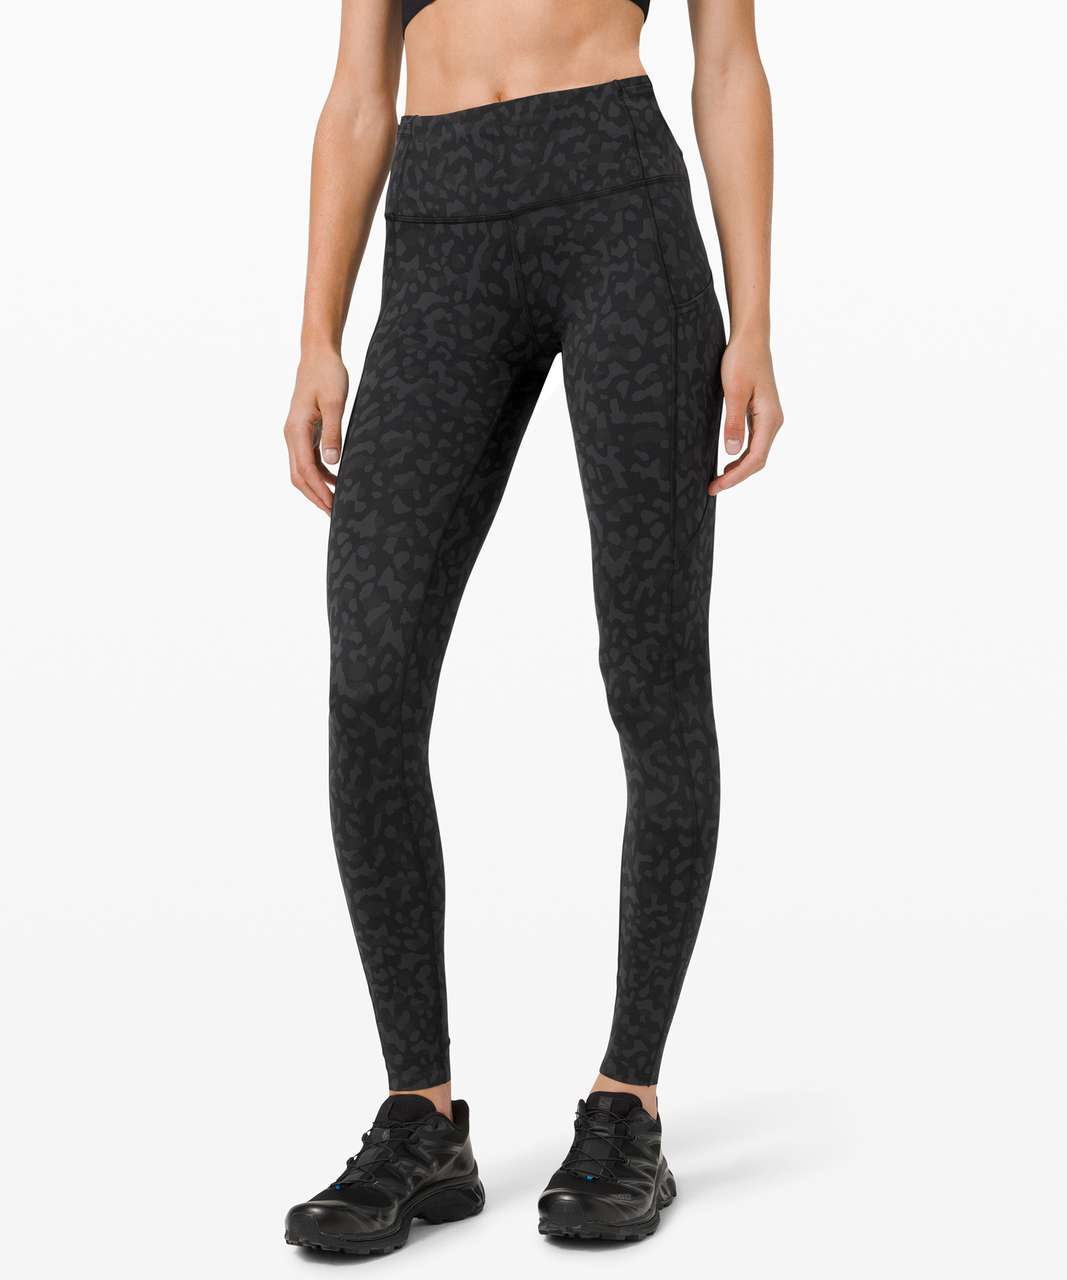 Lululemon Fast and Free Tight 28" *Non-Reflective - Formation Camo Deep Coal Multi